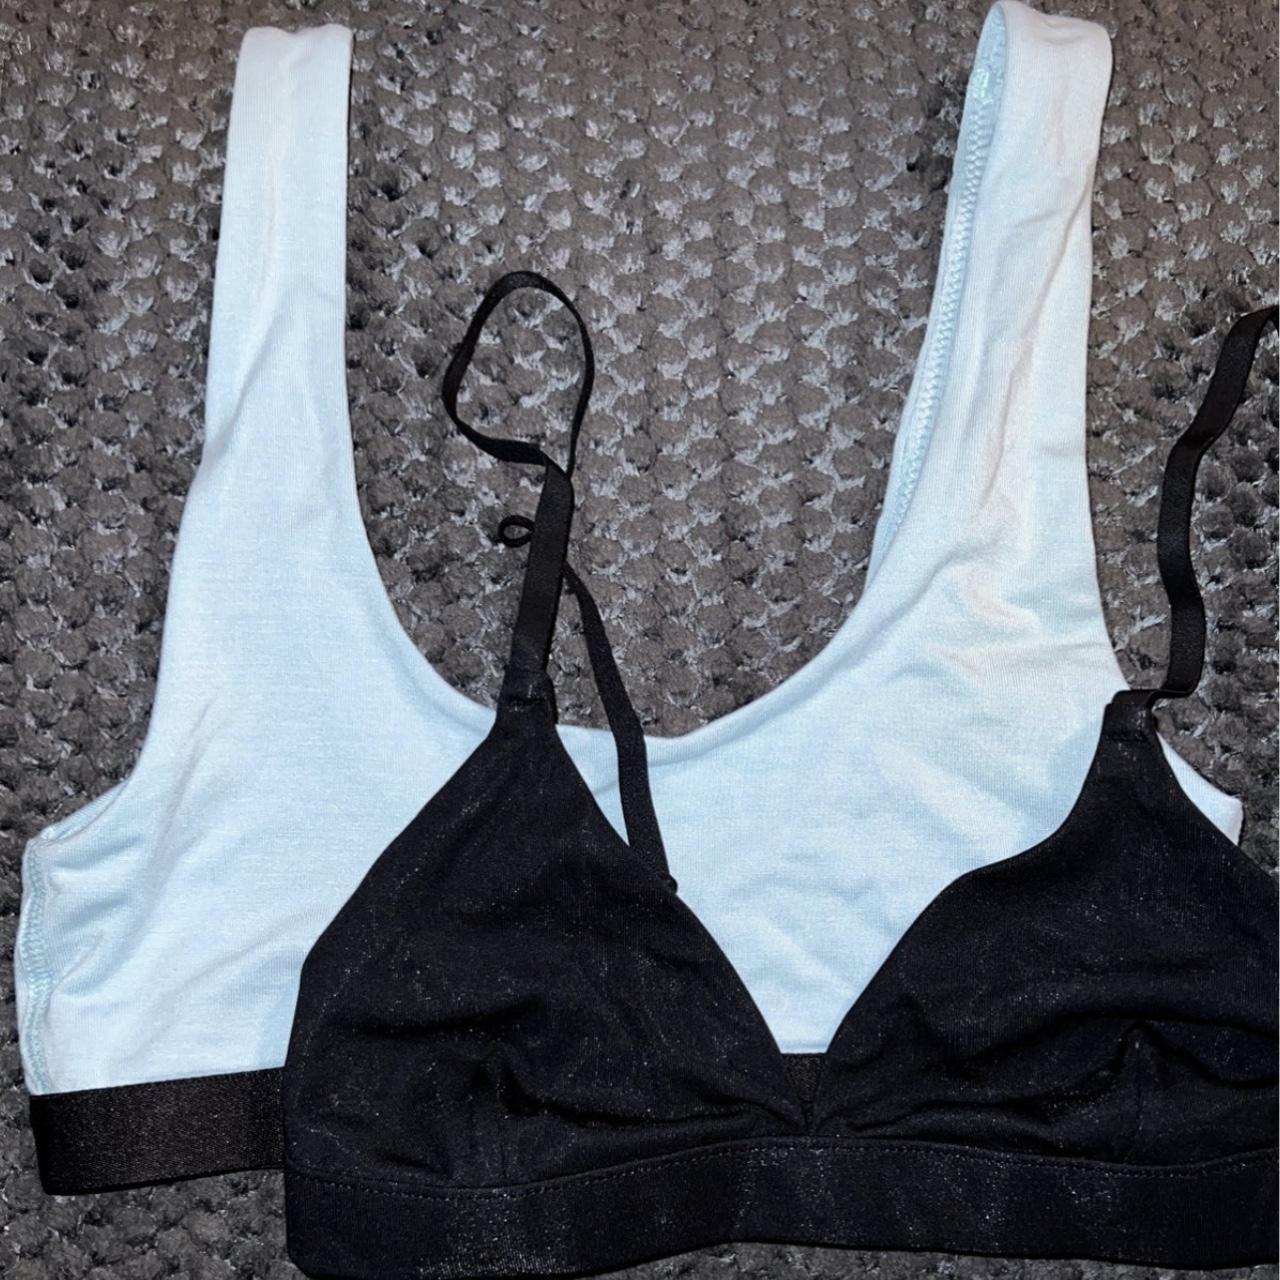 NWOT meundies bralettes, Size xs, Sizing pictured above